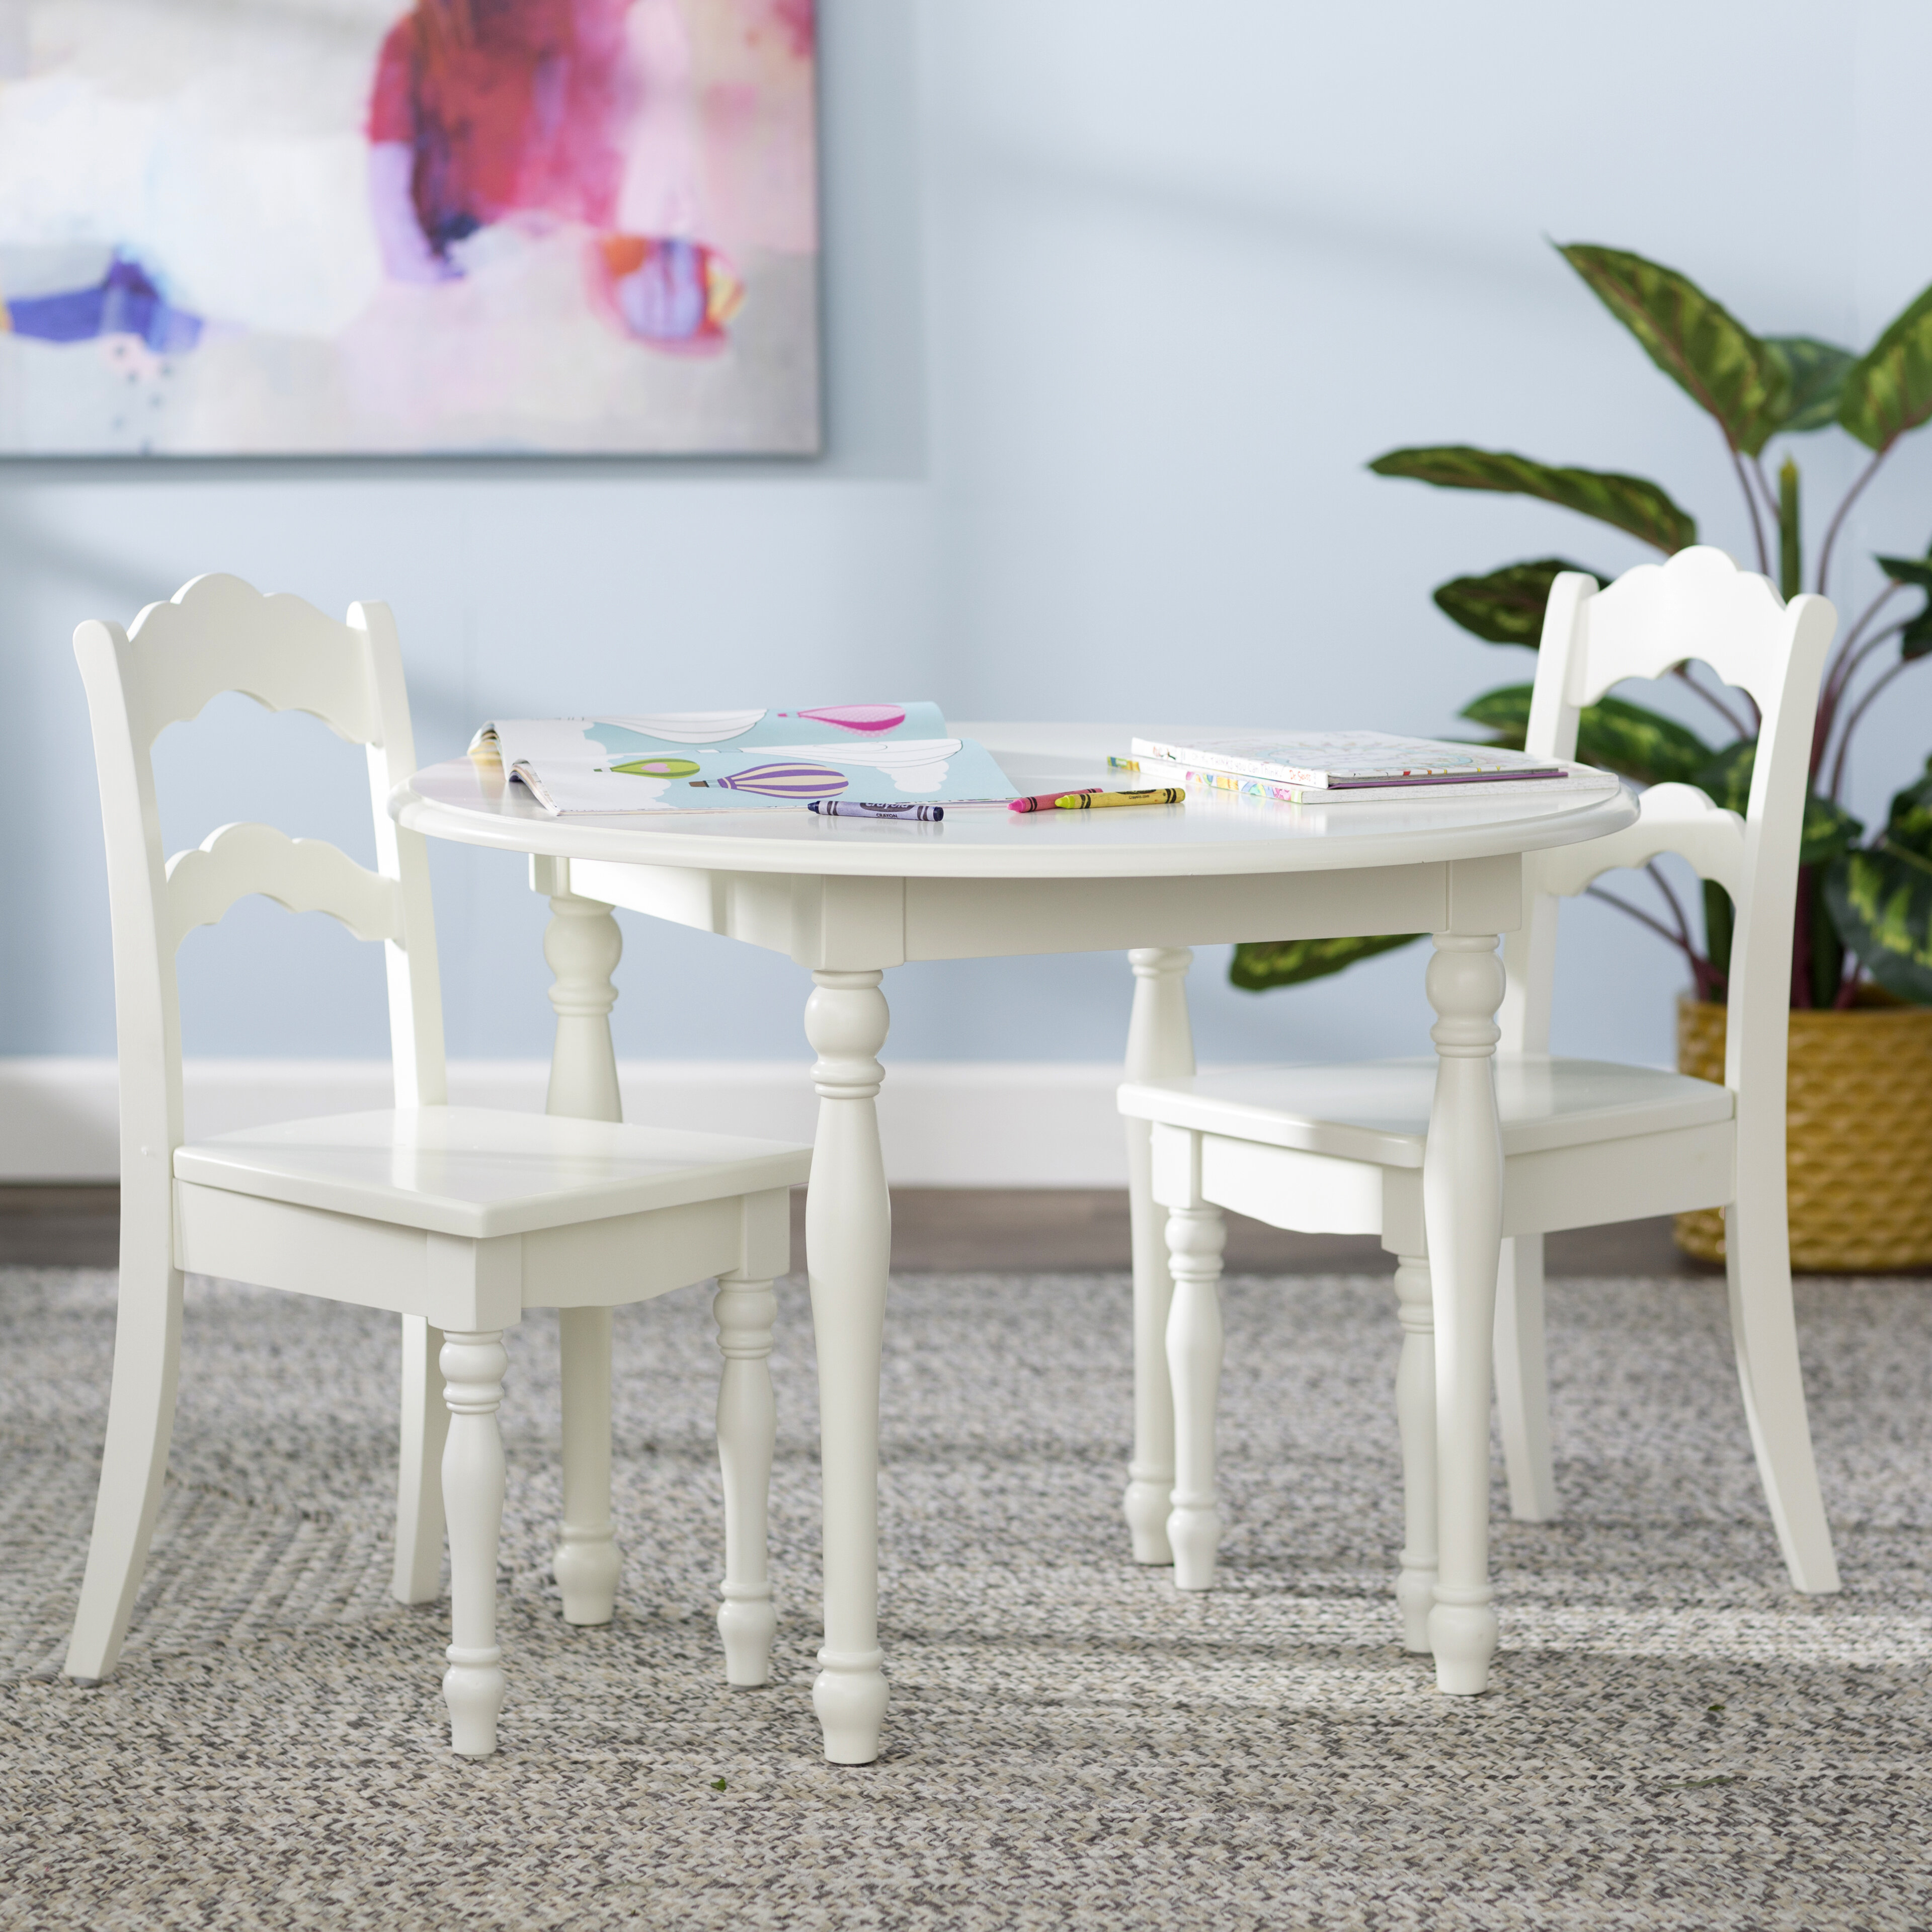 childrens table and chairs uk